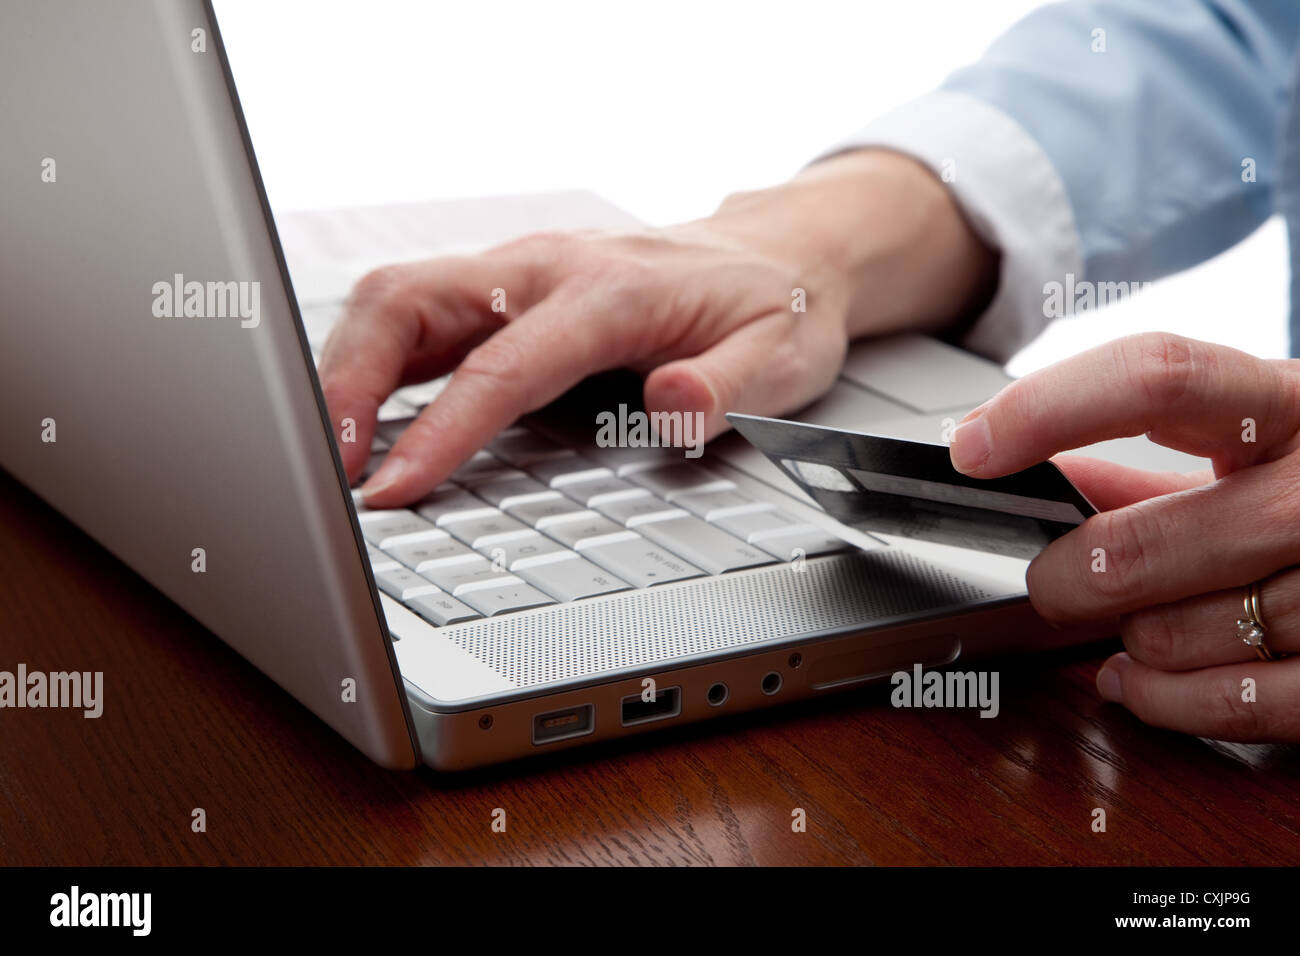 Woman hand with a laptop keyboard and credit card shopping on-line Stock Photo